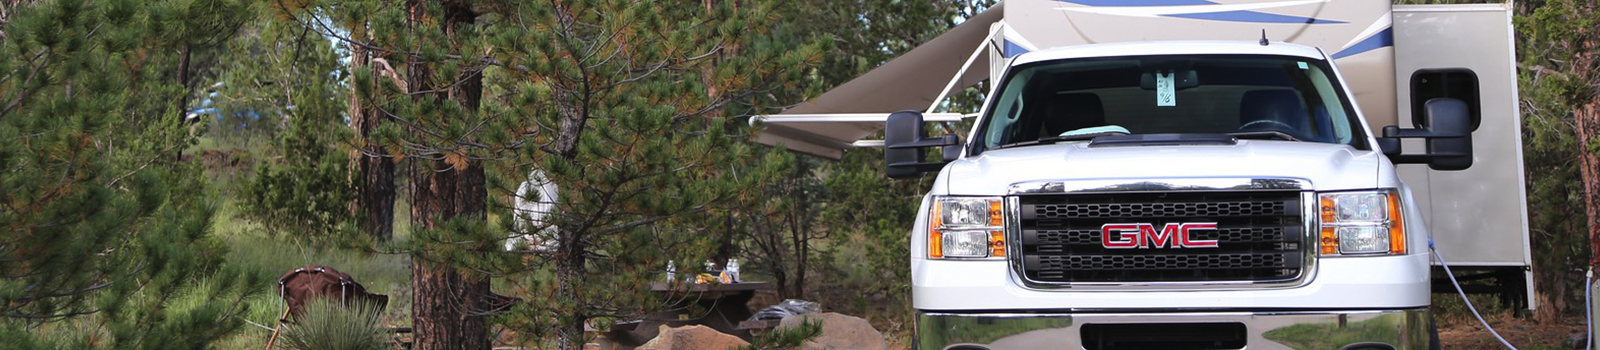 A truck and RV are backed into one of the popular forest campsites amid a sea of ponderosa pine trees.